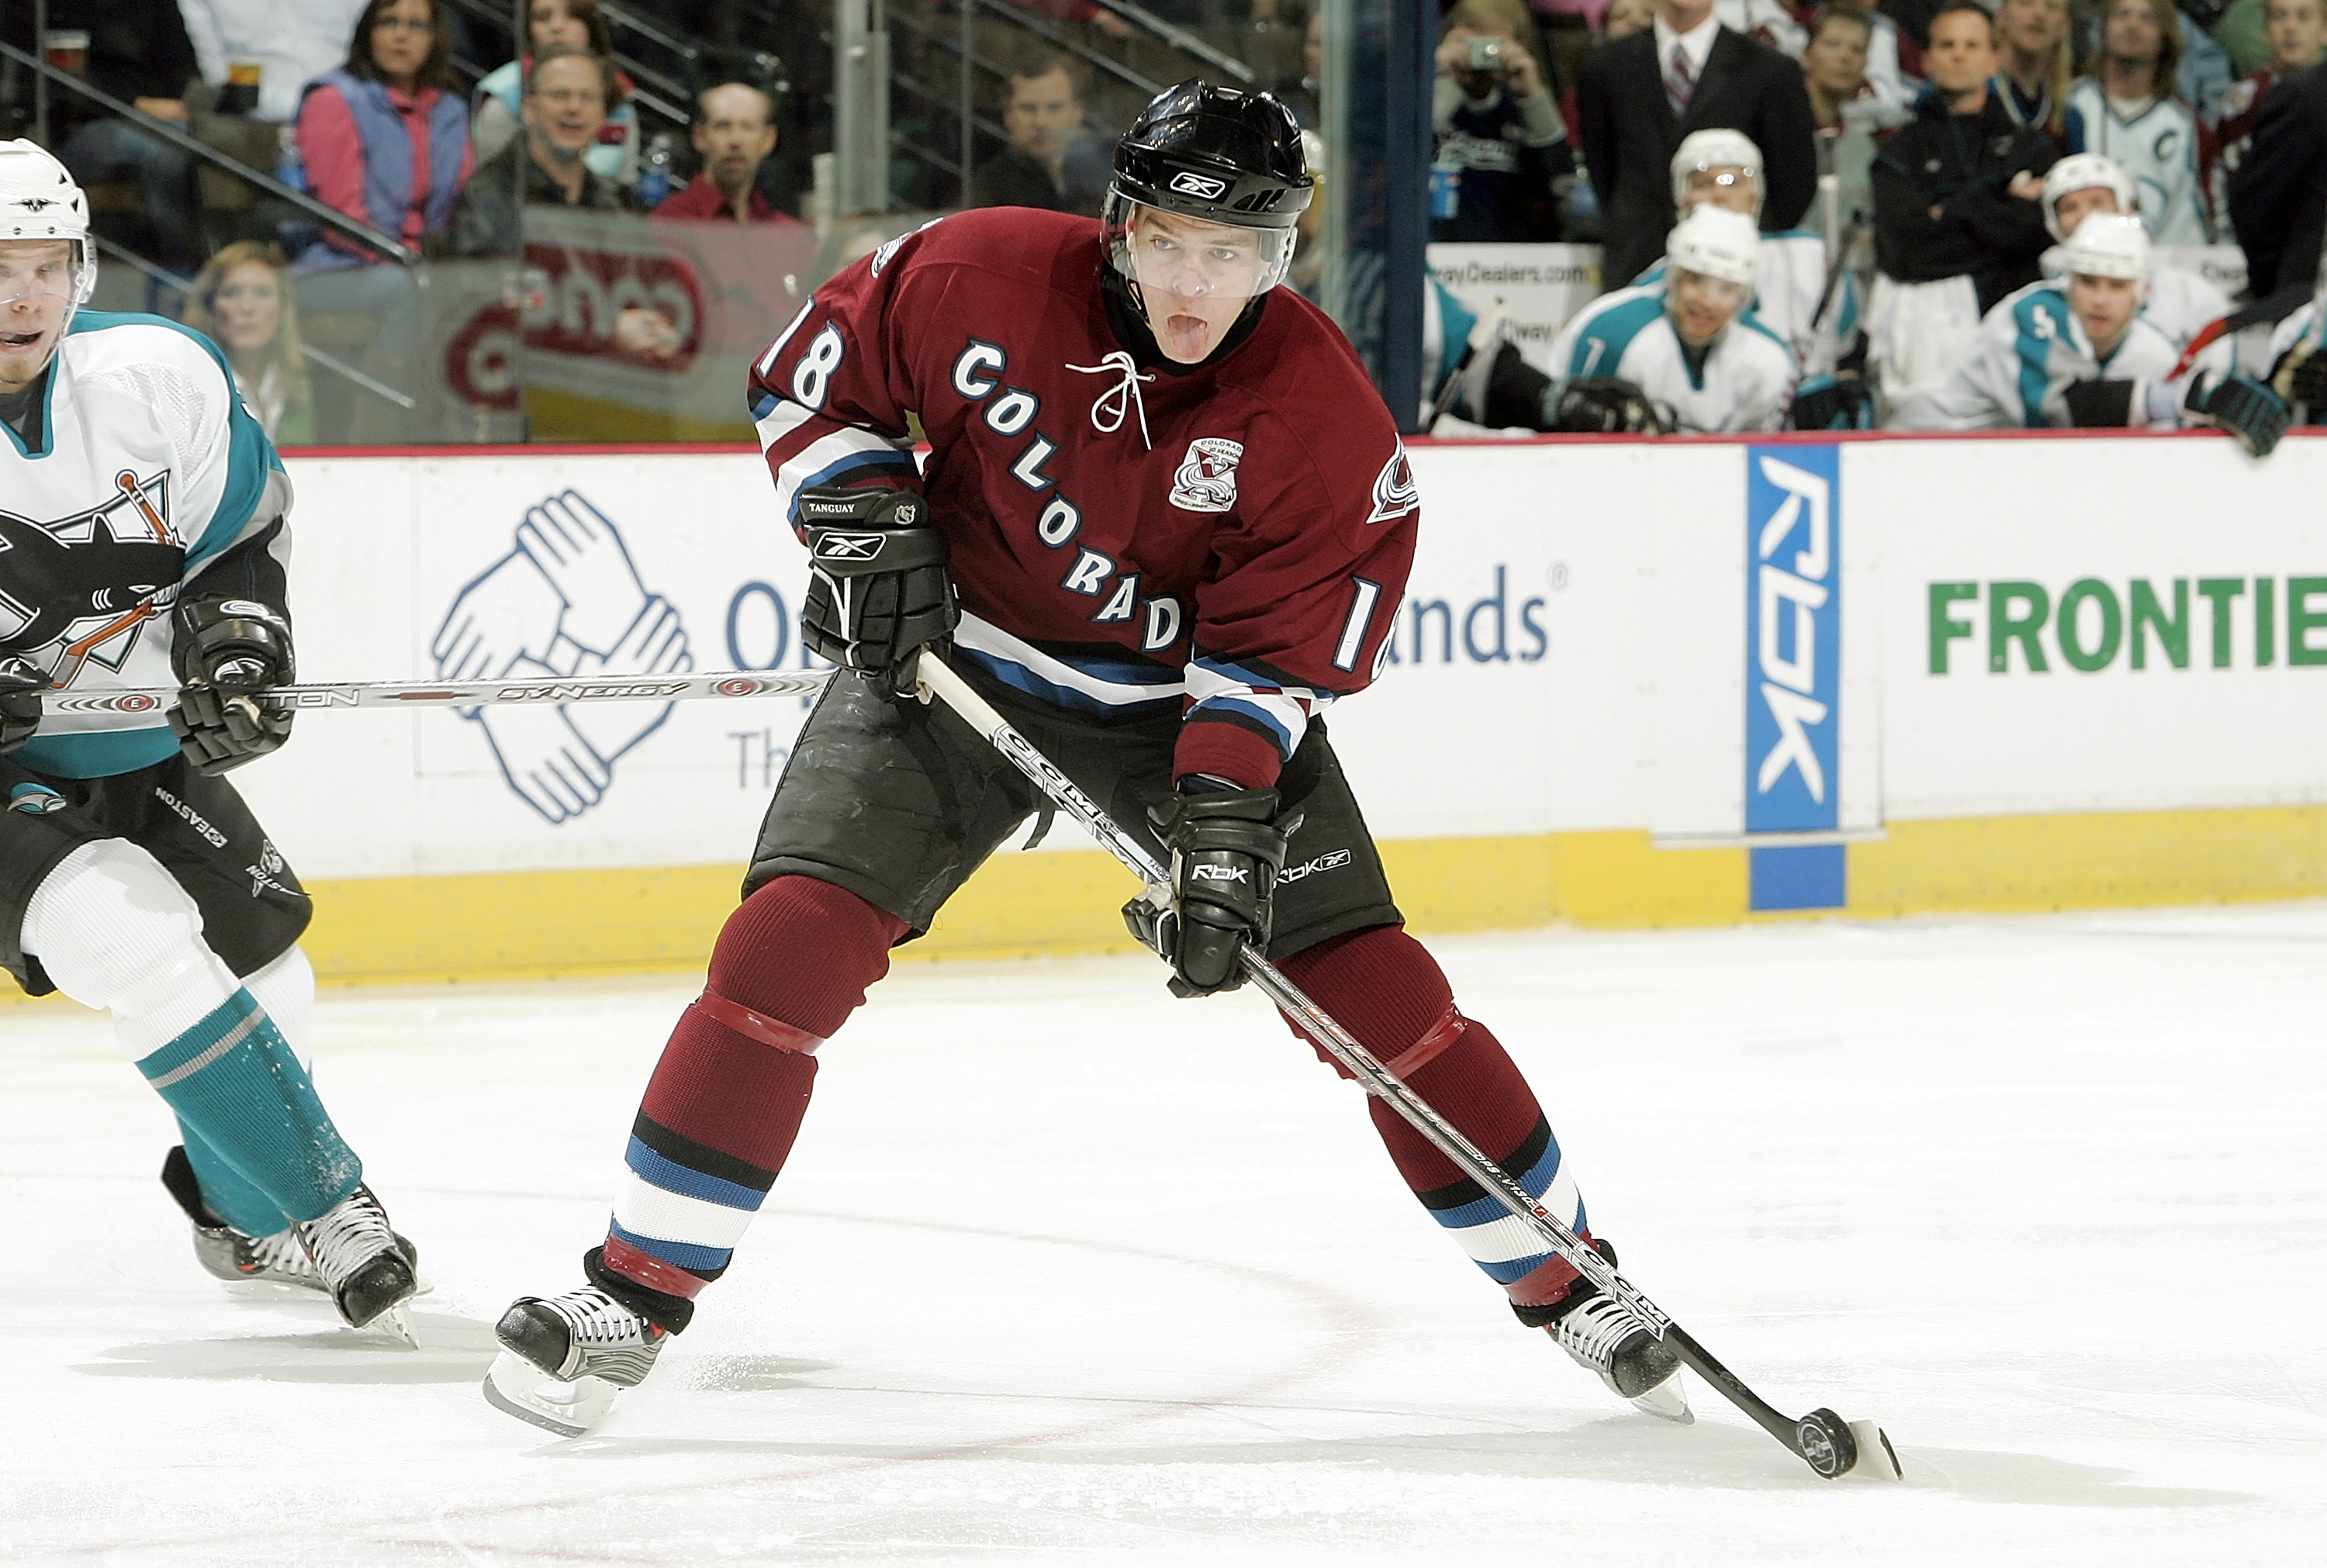 Avalanche will retire Peter Forsberg's No. 21 jersey – The Denver Post